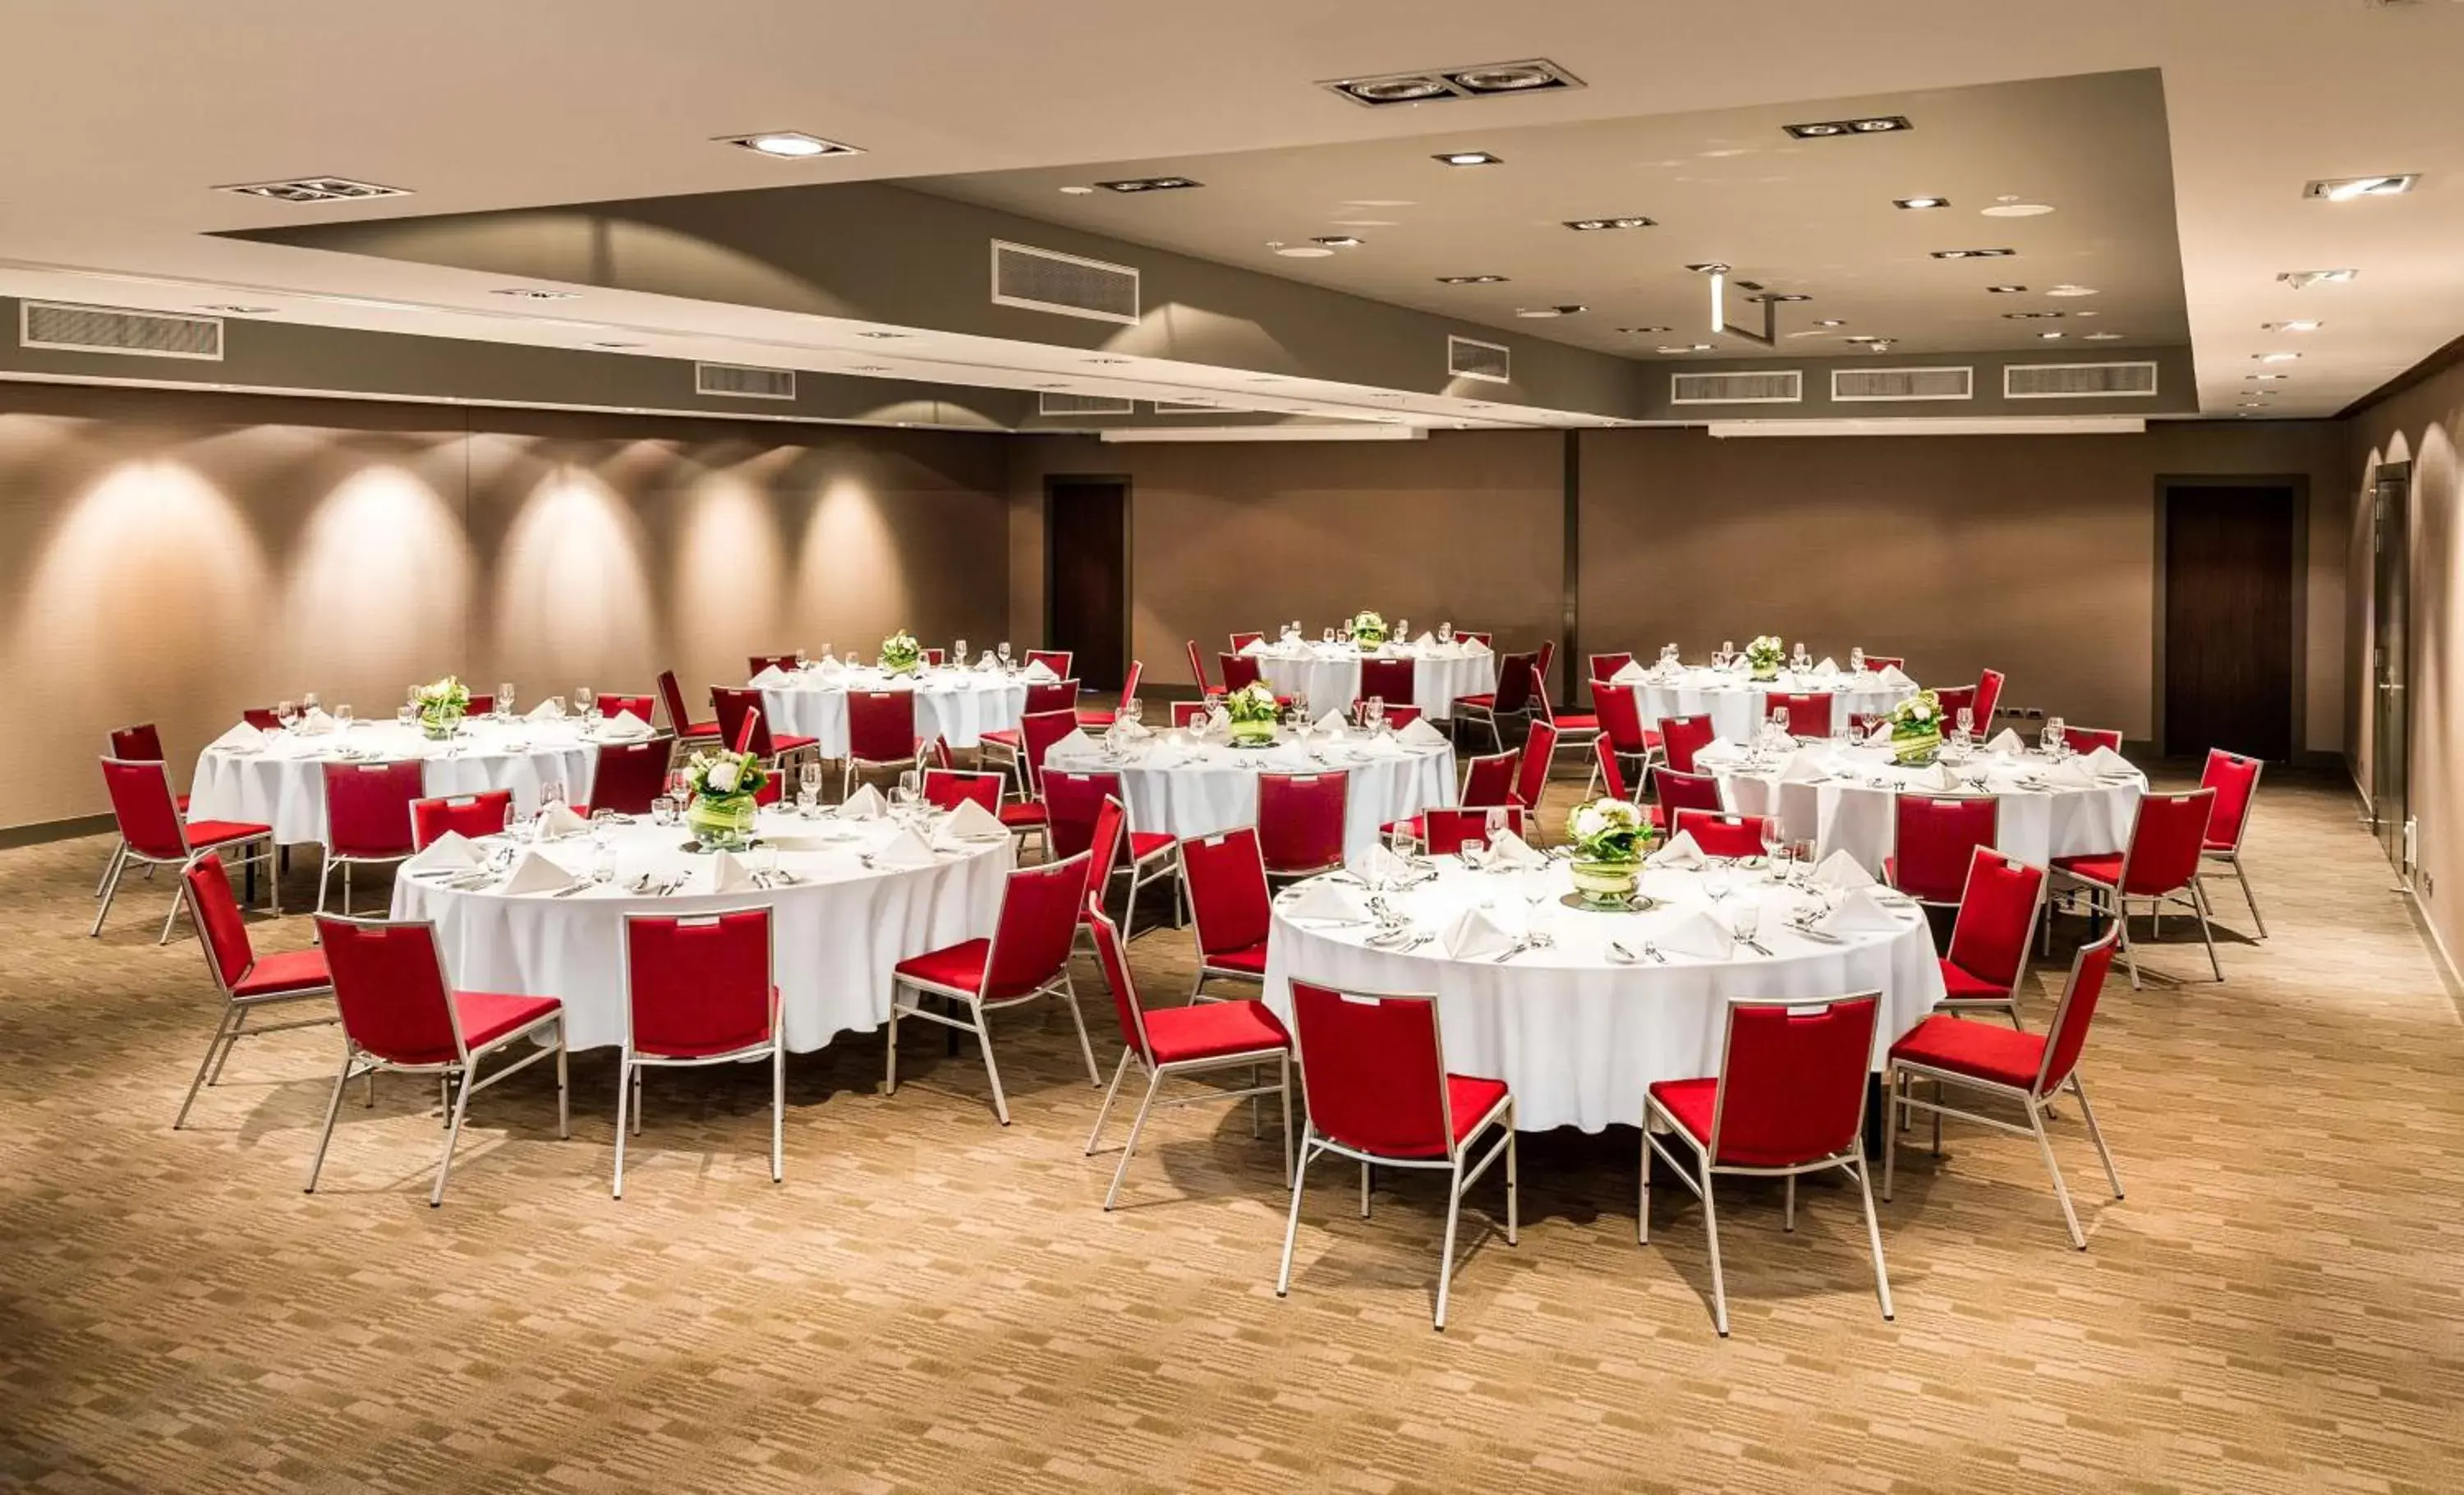 Meeting/conference room, Banquet Facilities in Hilton Queenstown Resort & Spa